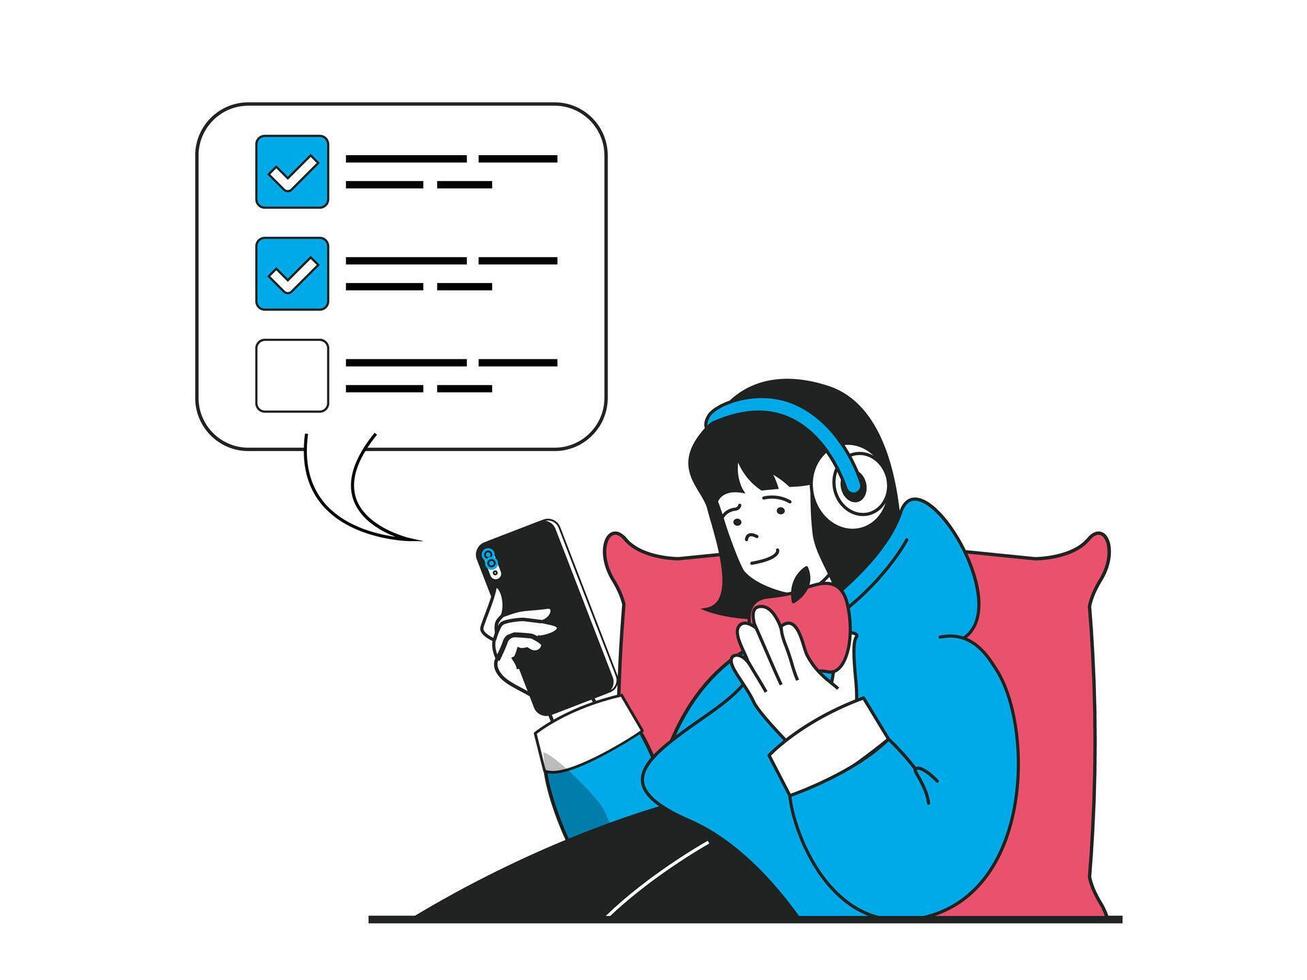 Freelance concept with character situation. Woman in headphones doing work tasks from to-do list and working on smartphone online at home. Vector illustration with people scene in flat design for web